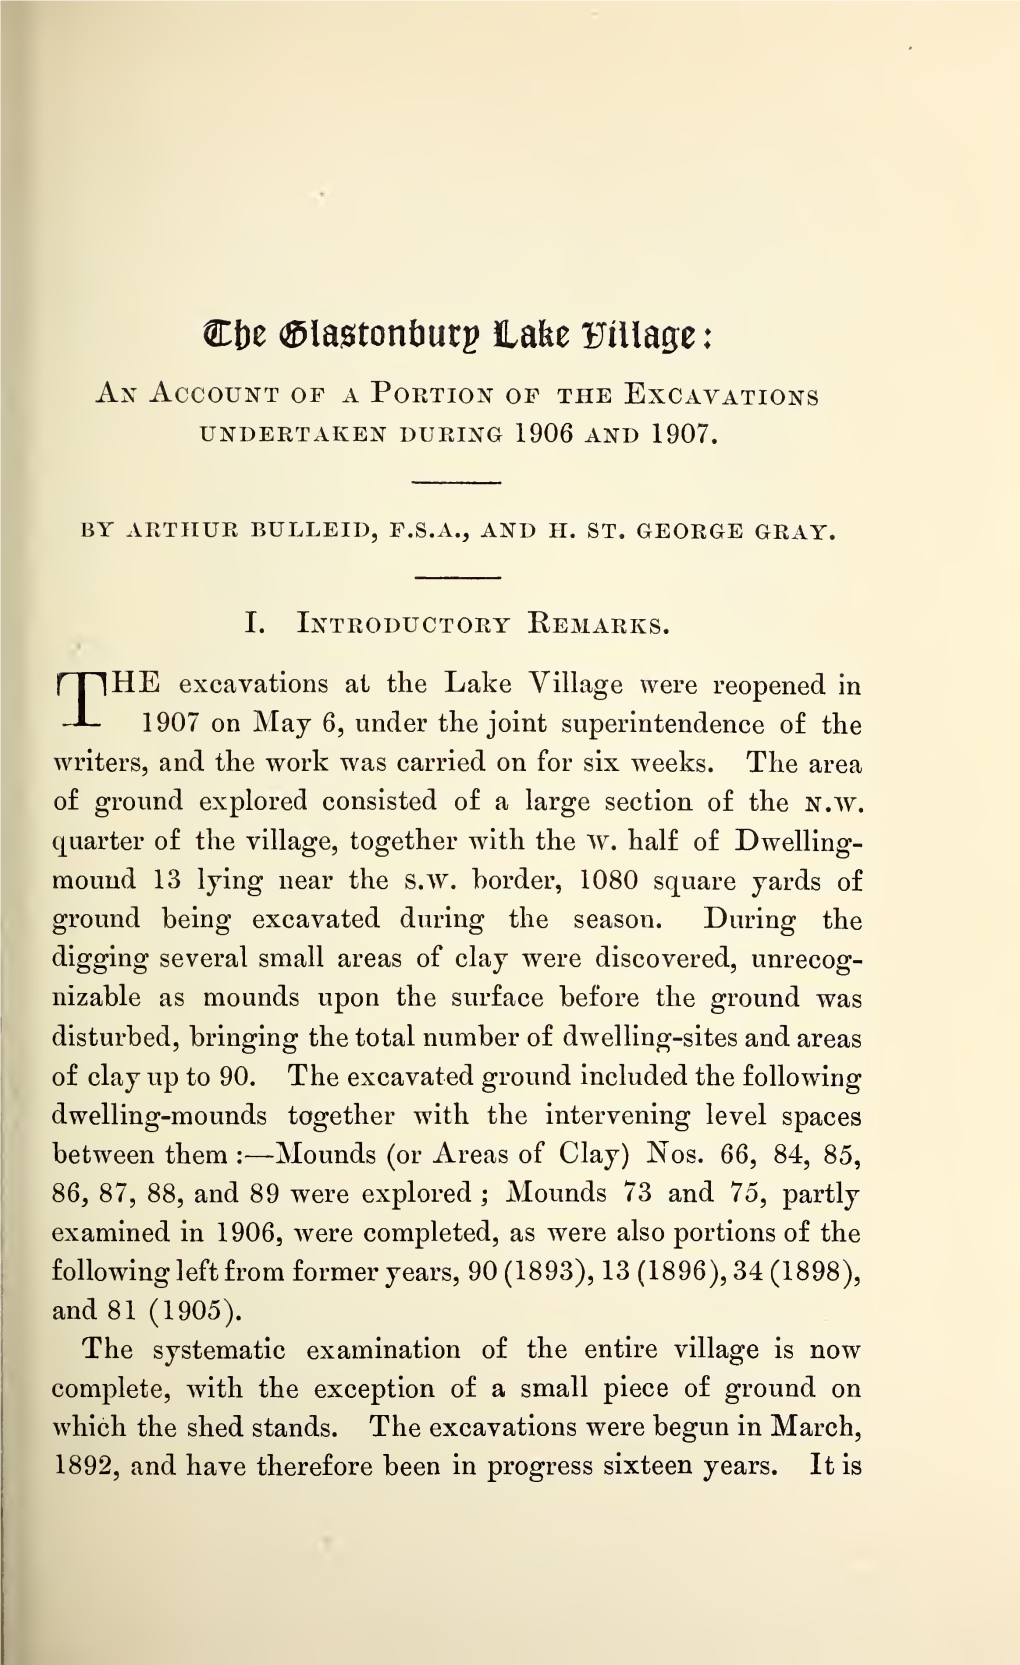 Bulleid, A, and St. George Gray, H, the Glastonbury Lake Village